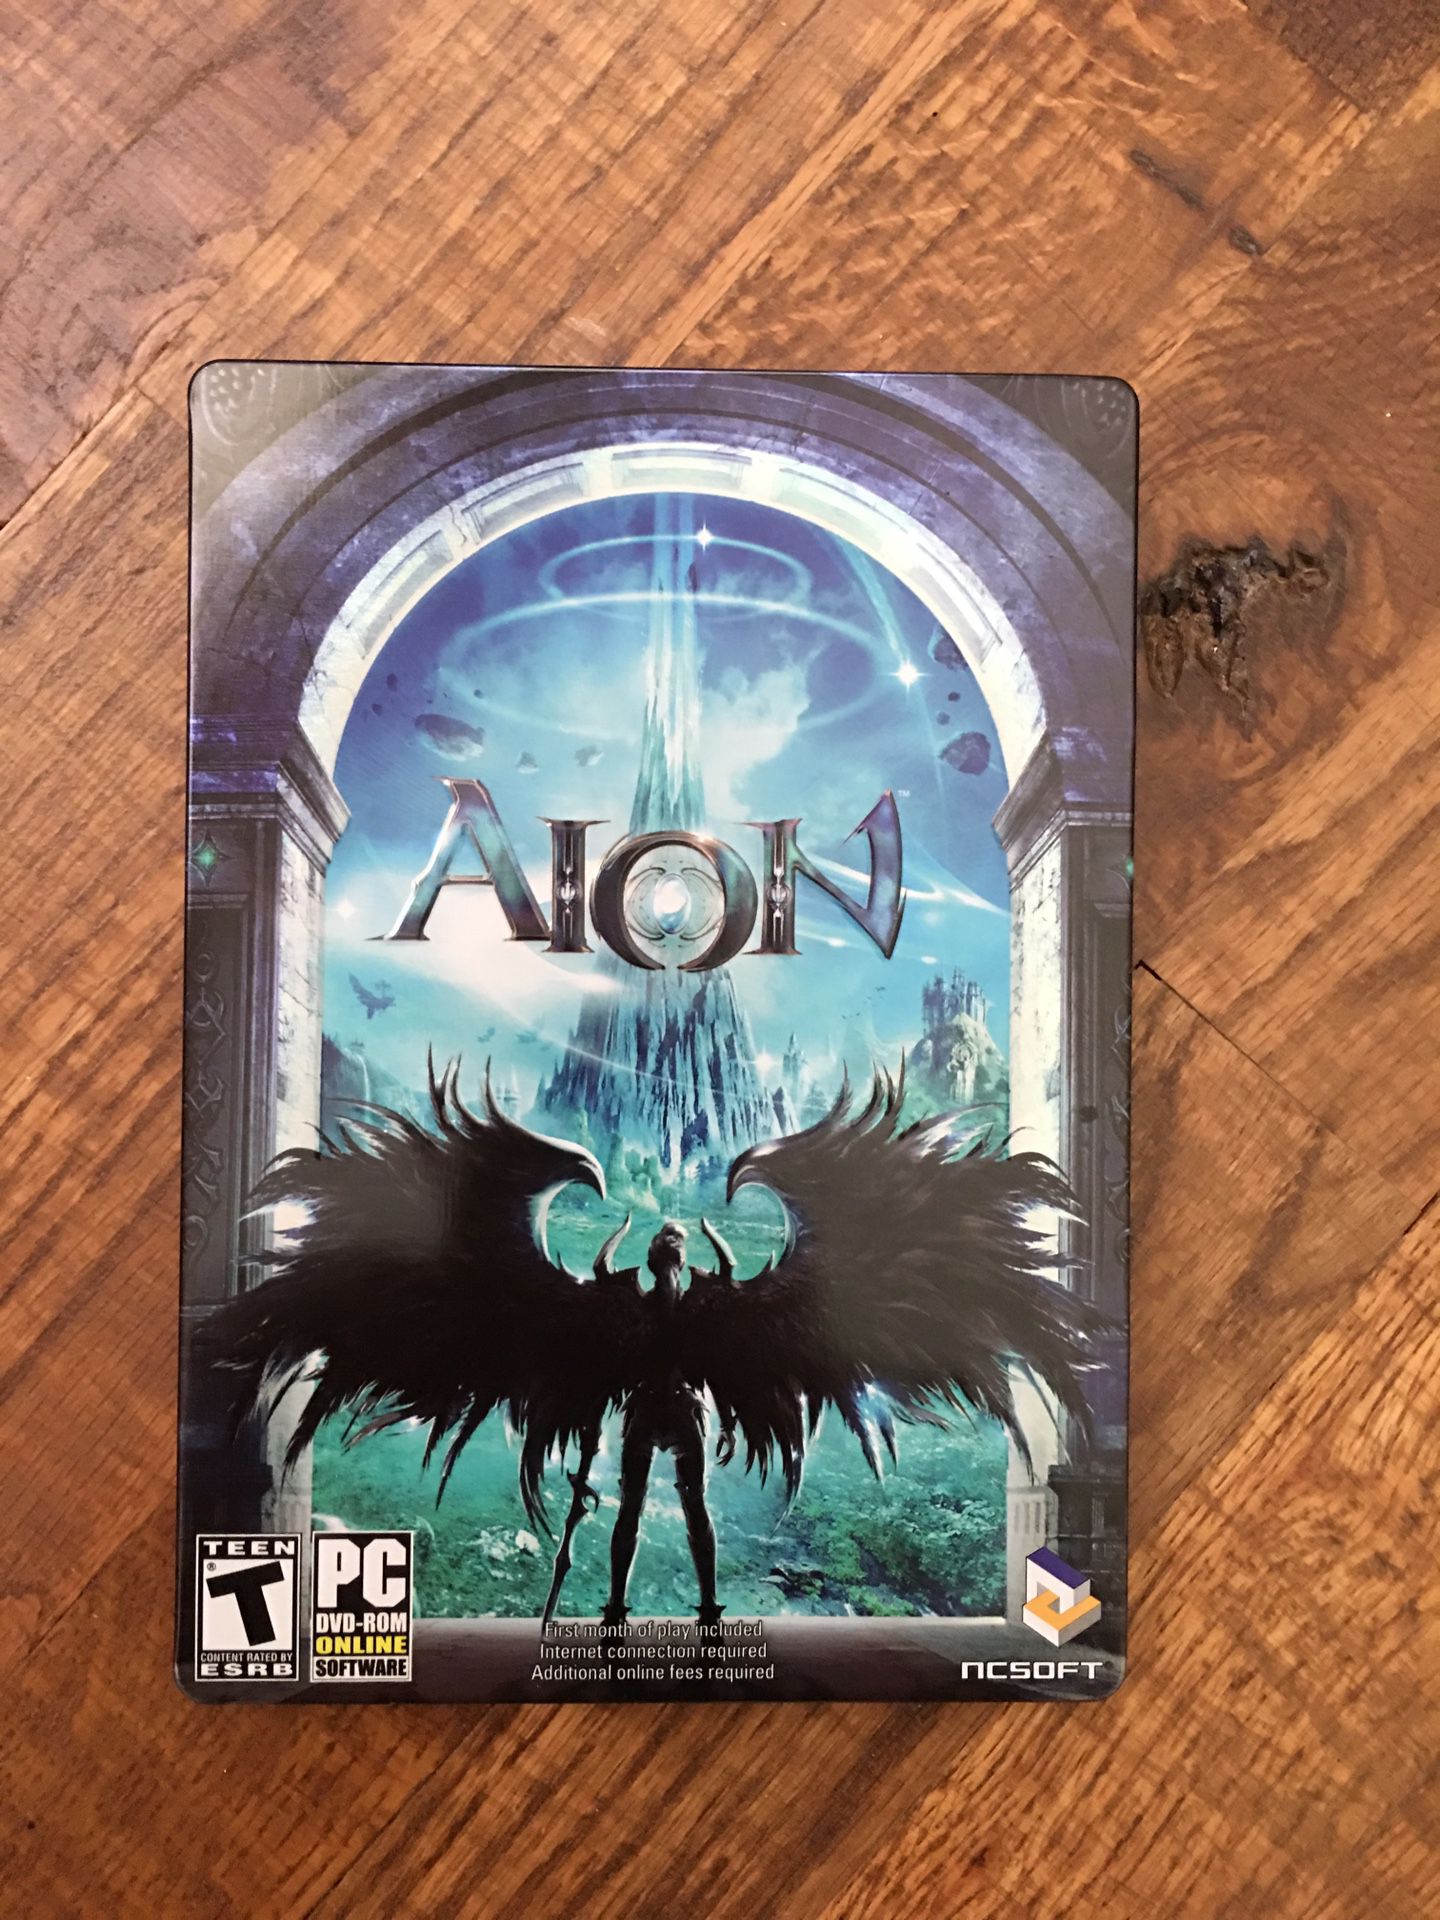 Aion PC Game